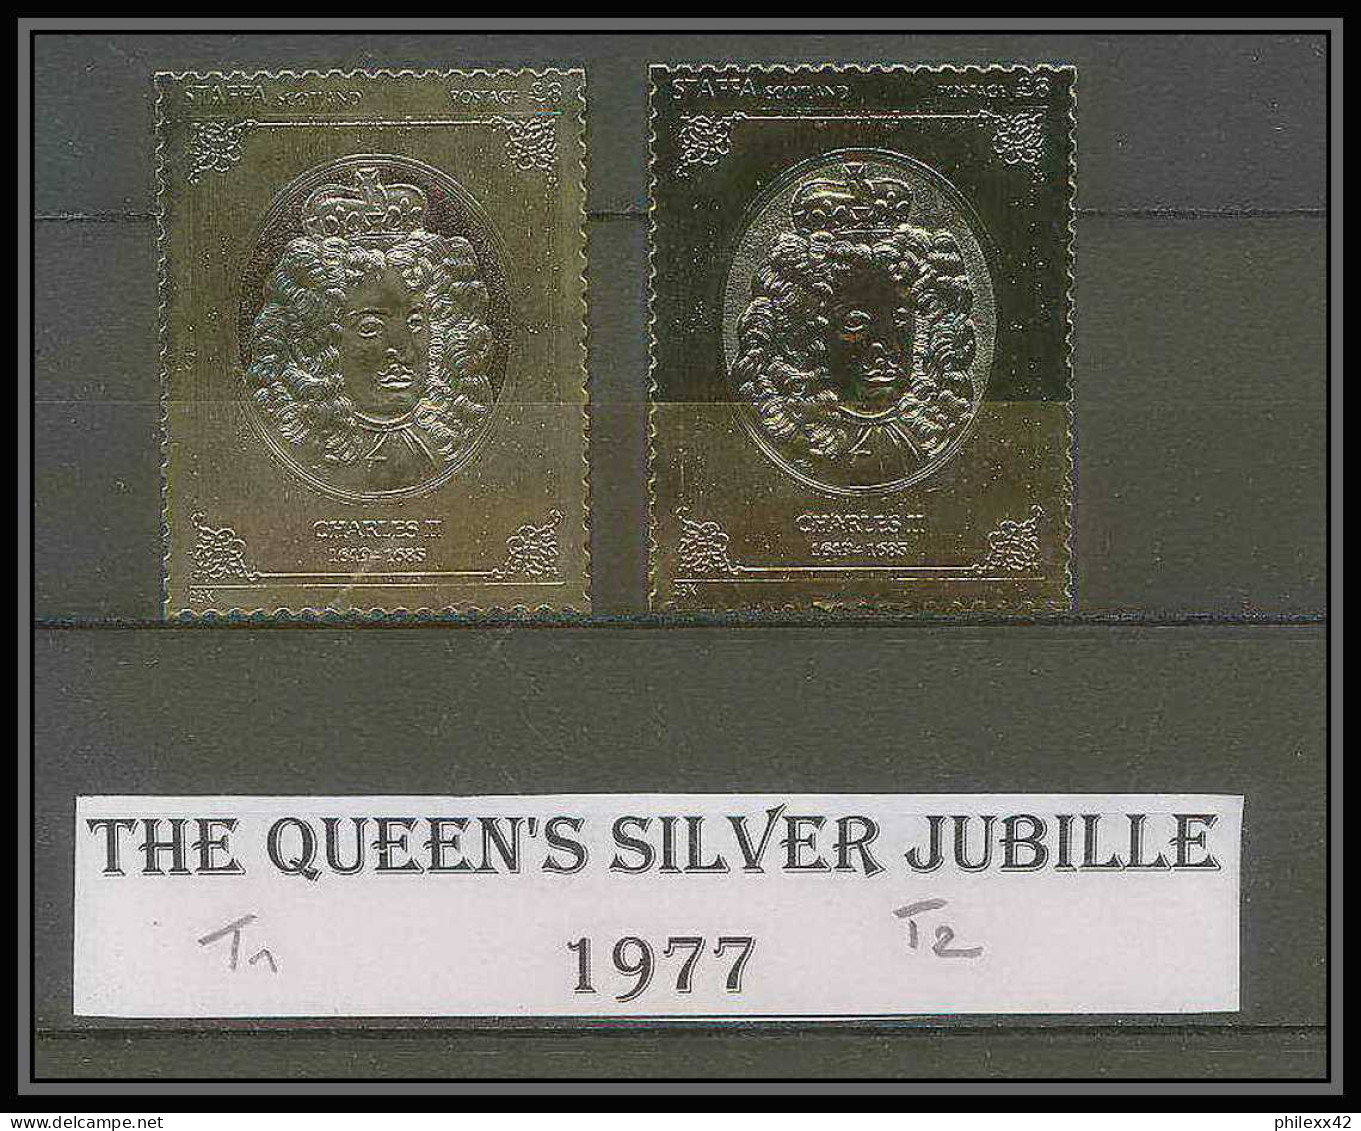 462a Staffa Scotland The Queen's Silver Jubilee 1977 OR Gold Stamps Monarchy United Kingdom Charles 2 Type 1& 2 ** - Schotland